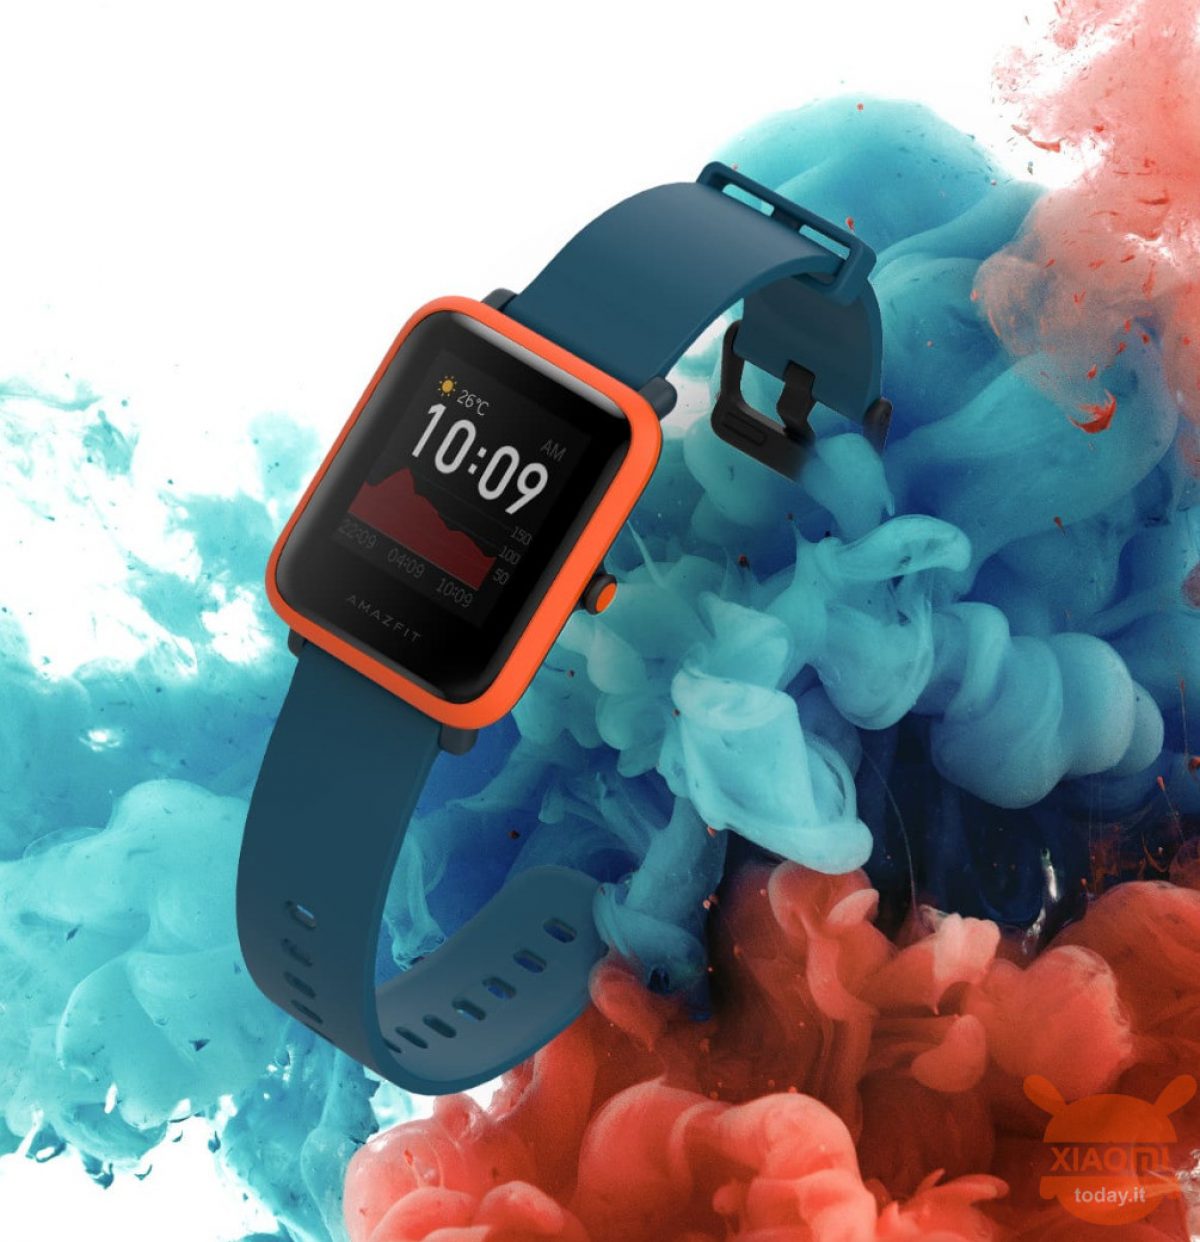 Official Amazfit Bip S Features And Price Of The Lightweight Smartwatch